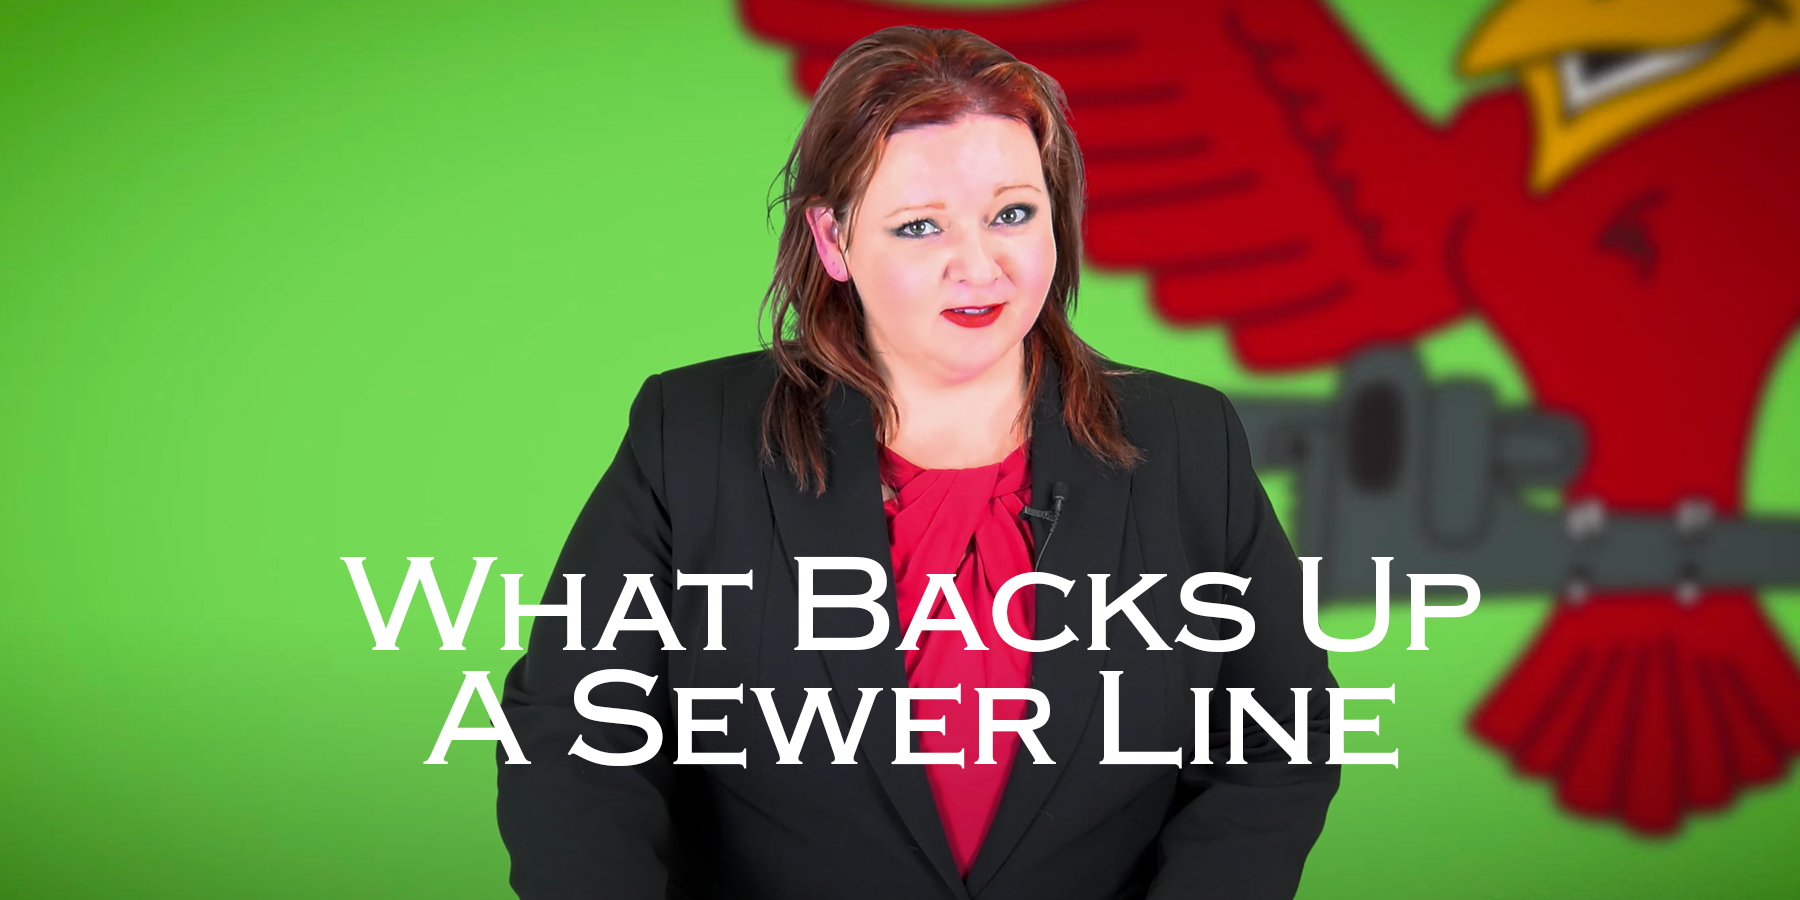 What-backs-up-a-sewer-line